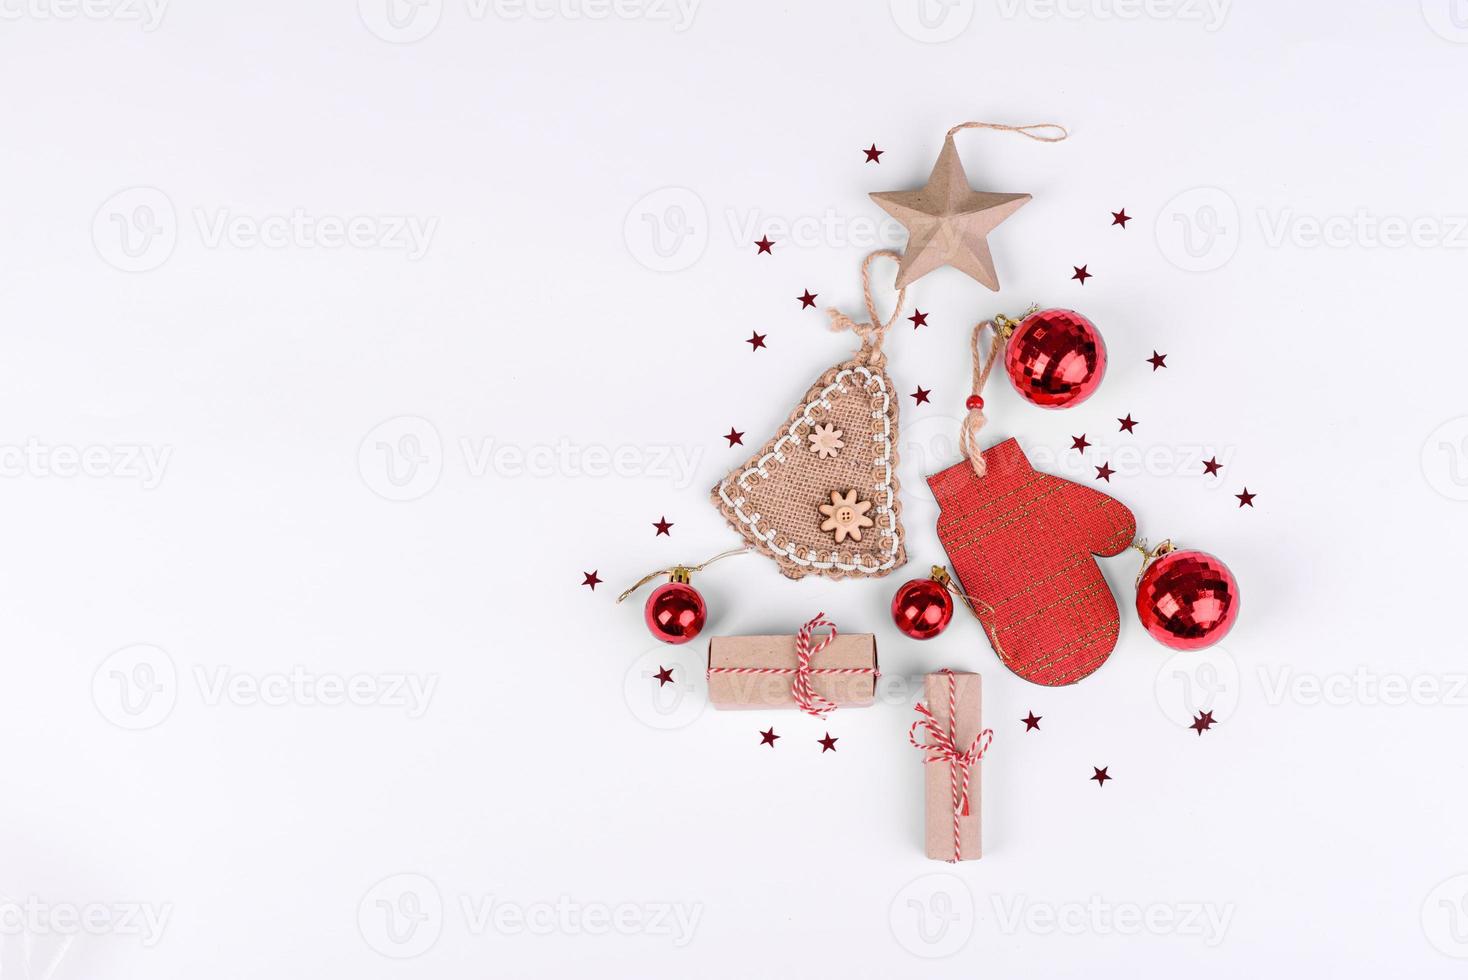 Gifts, fir tree branches, red decorations on white background photo